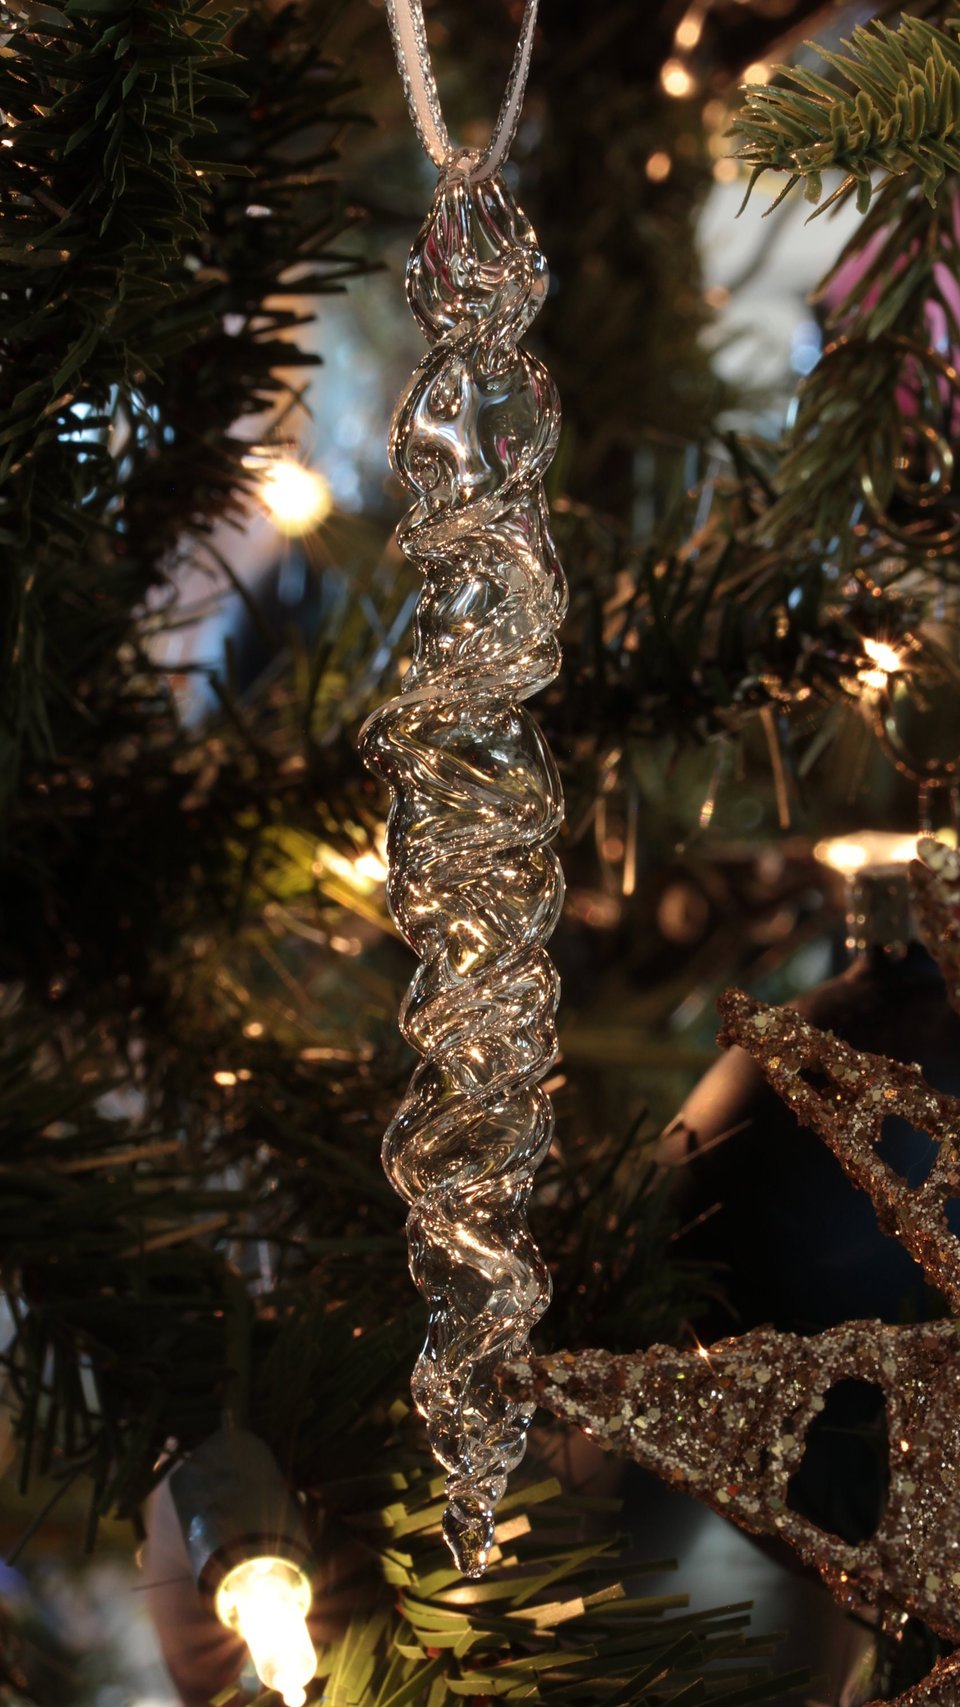 Hand Blown Icicle Ornaments (set of 5) - Hollow Glass Icicles - Handmade Christmas Tree Ornament, Holiday Decor, Yule, Christmas Decorations